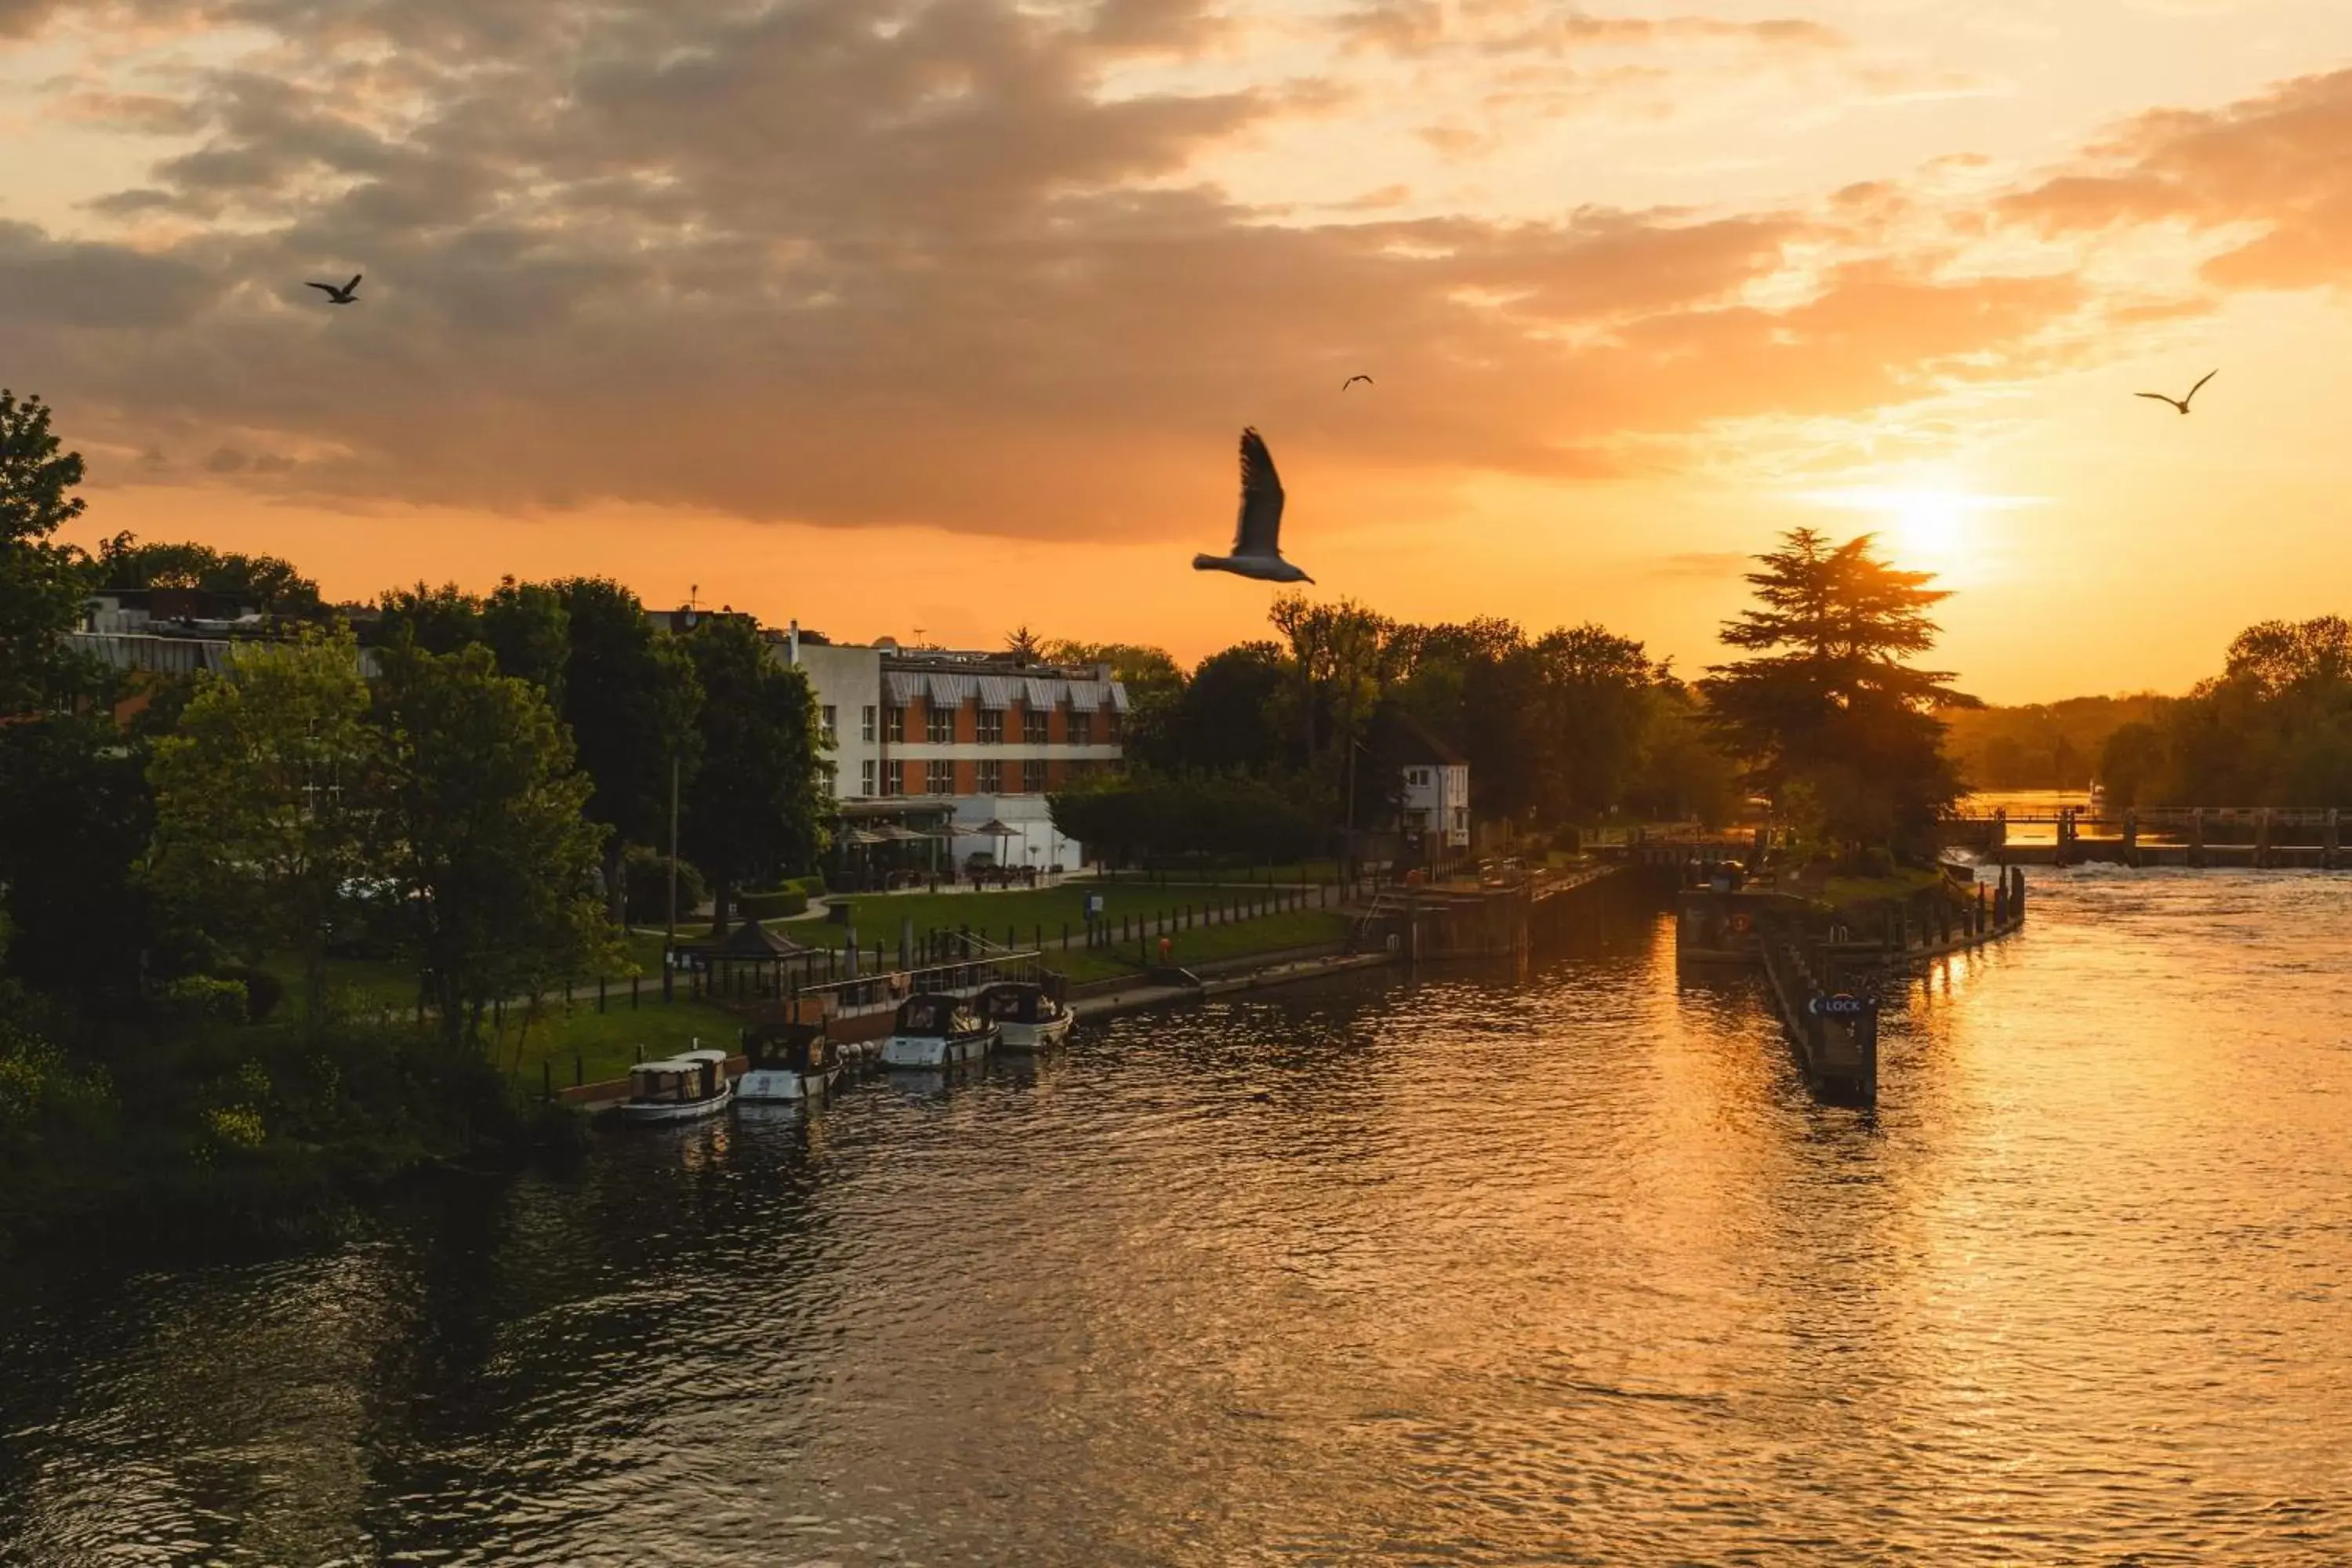 Property building, Sunrise/Sunset in The Runnymede on Thames